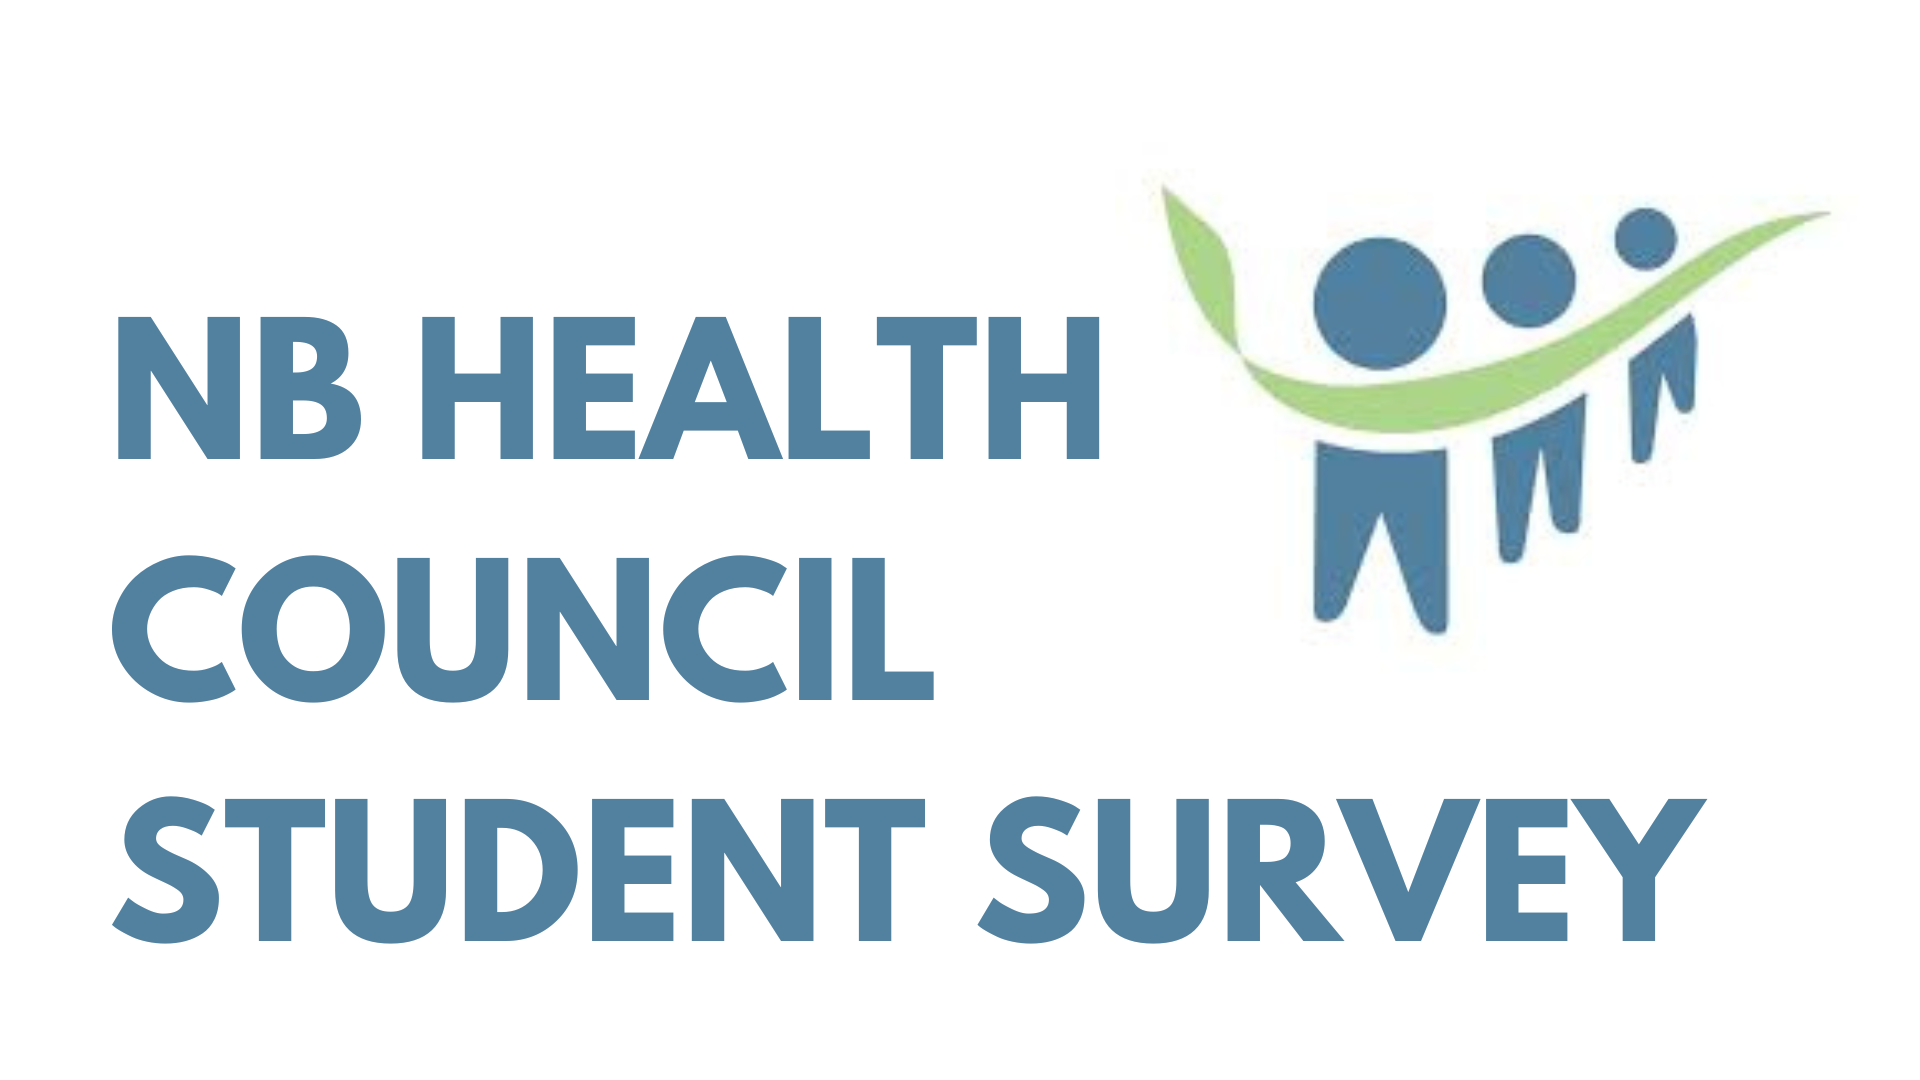 blue text on white background, "NB HEALTH COUNCIL STUDENT SURVEY" next to three blue human figures with a green ribbon running through them